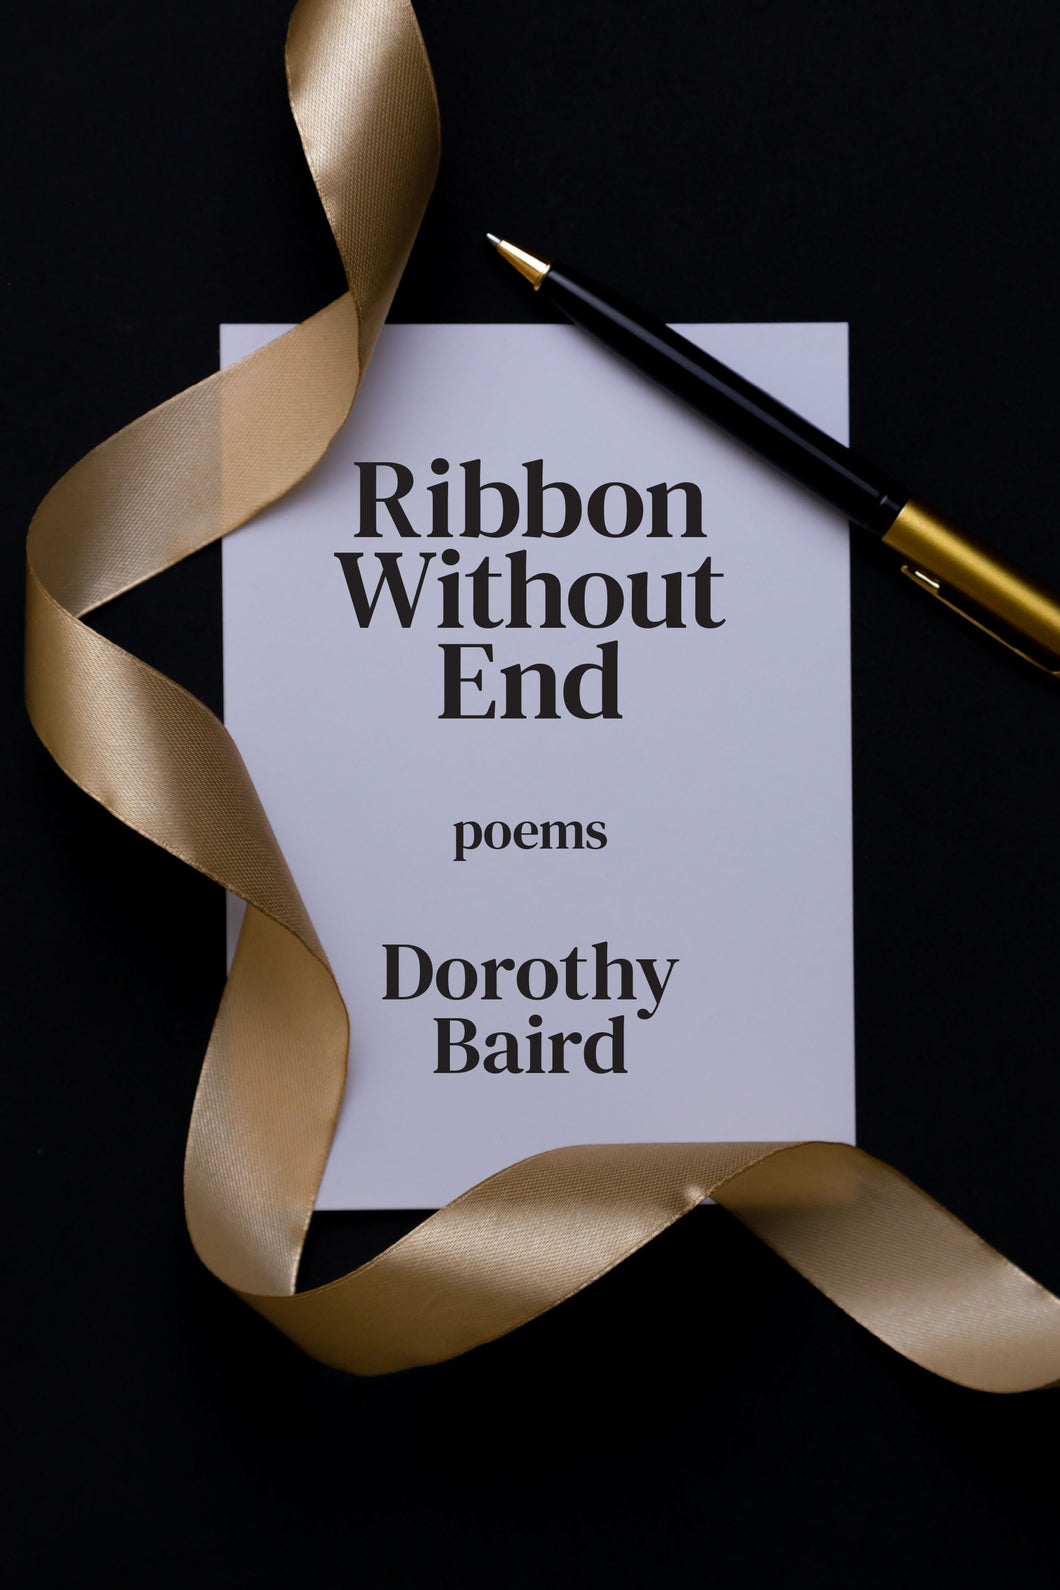 Ribbon Without End